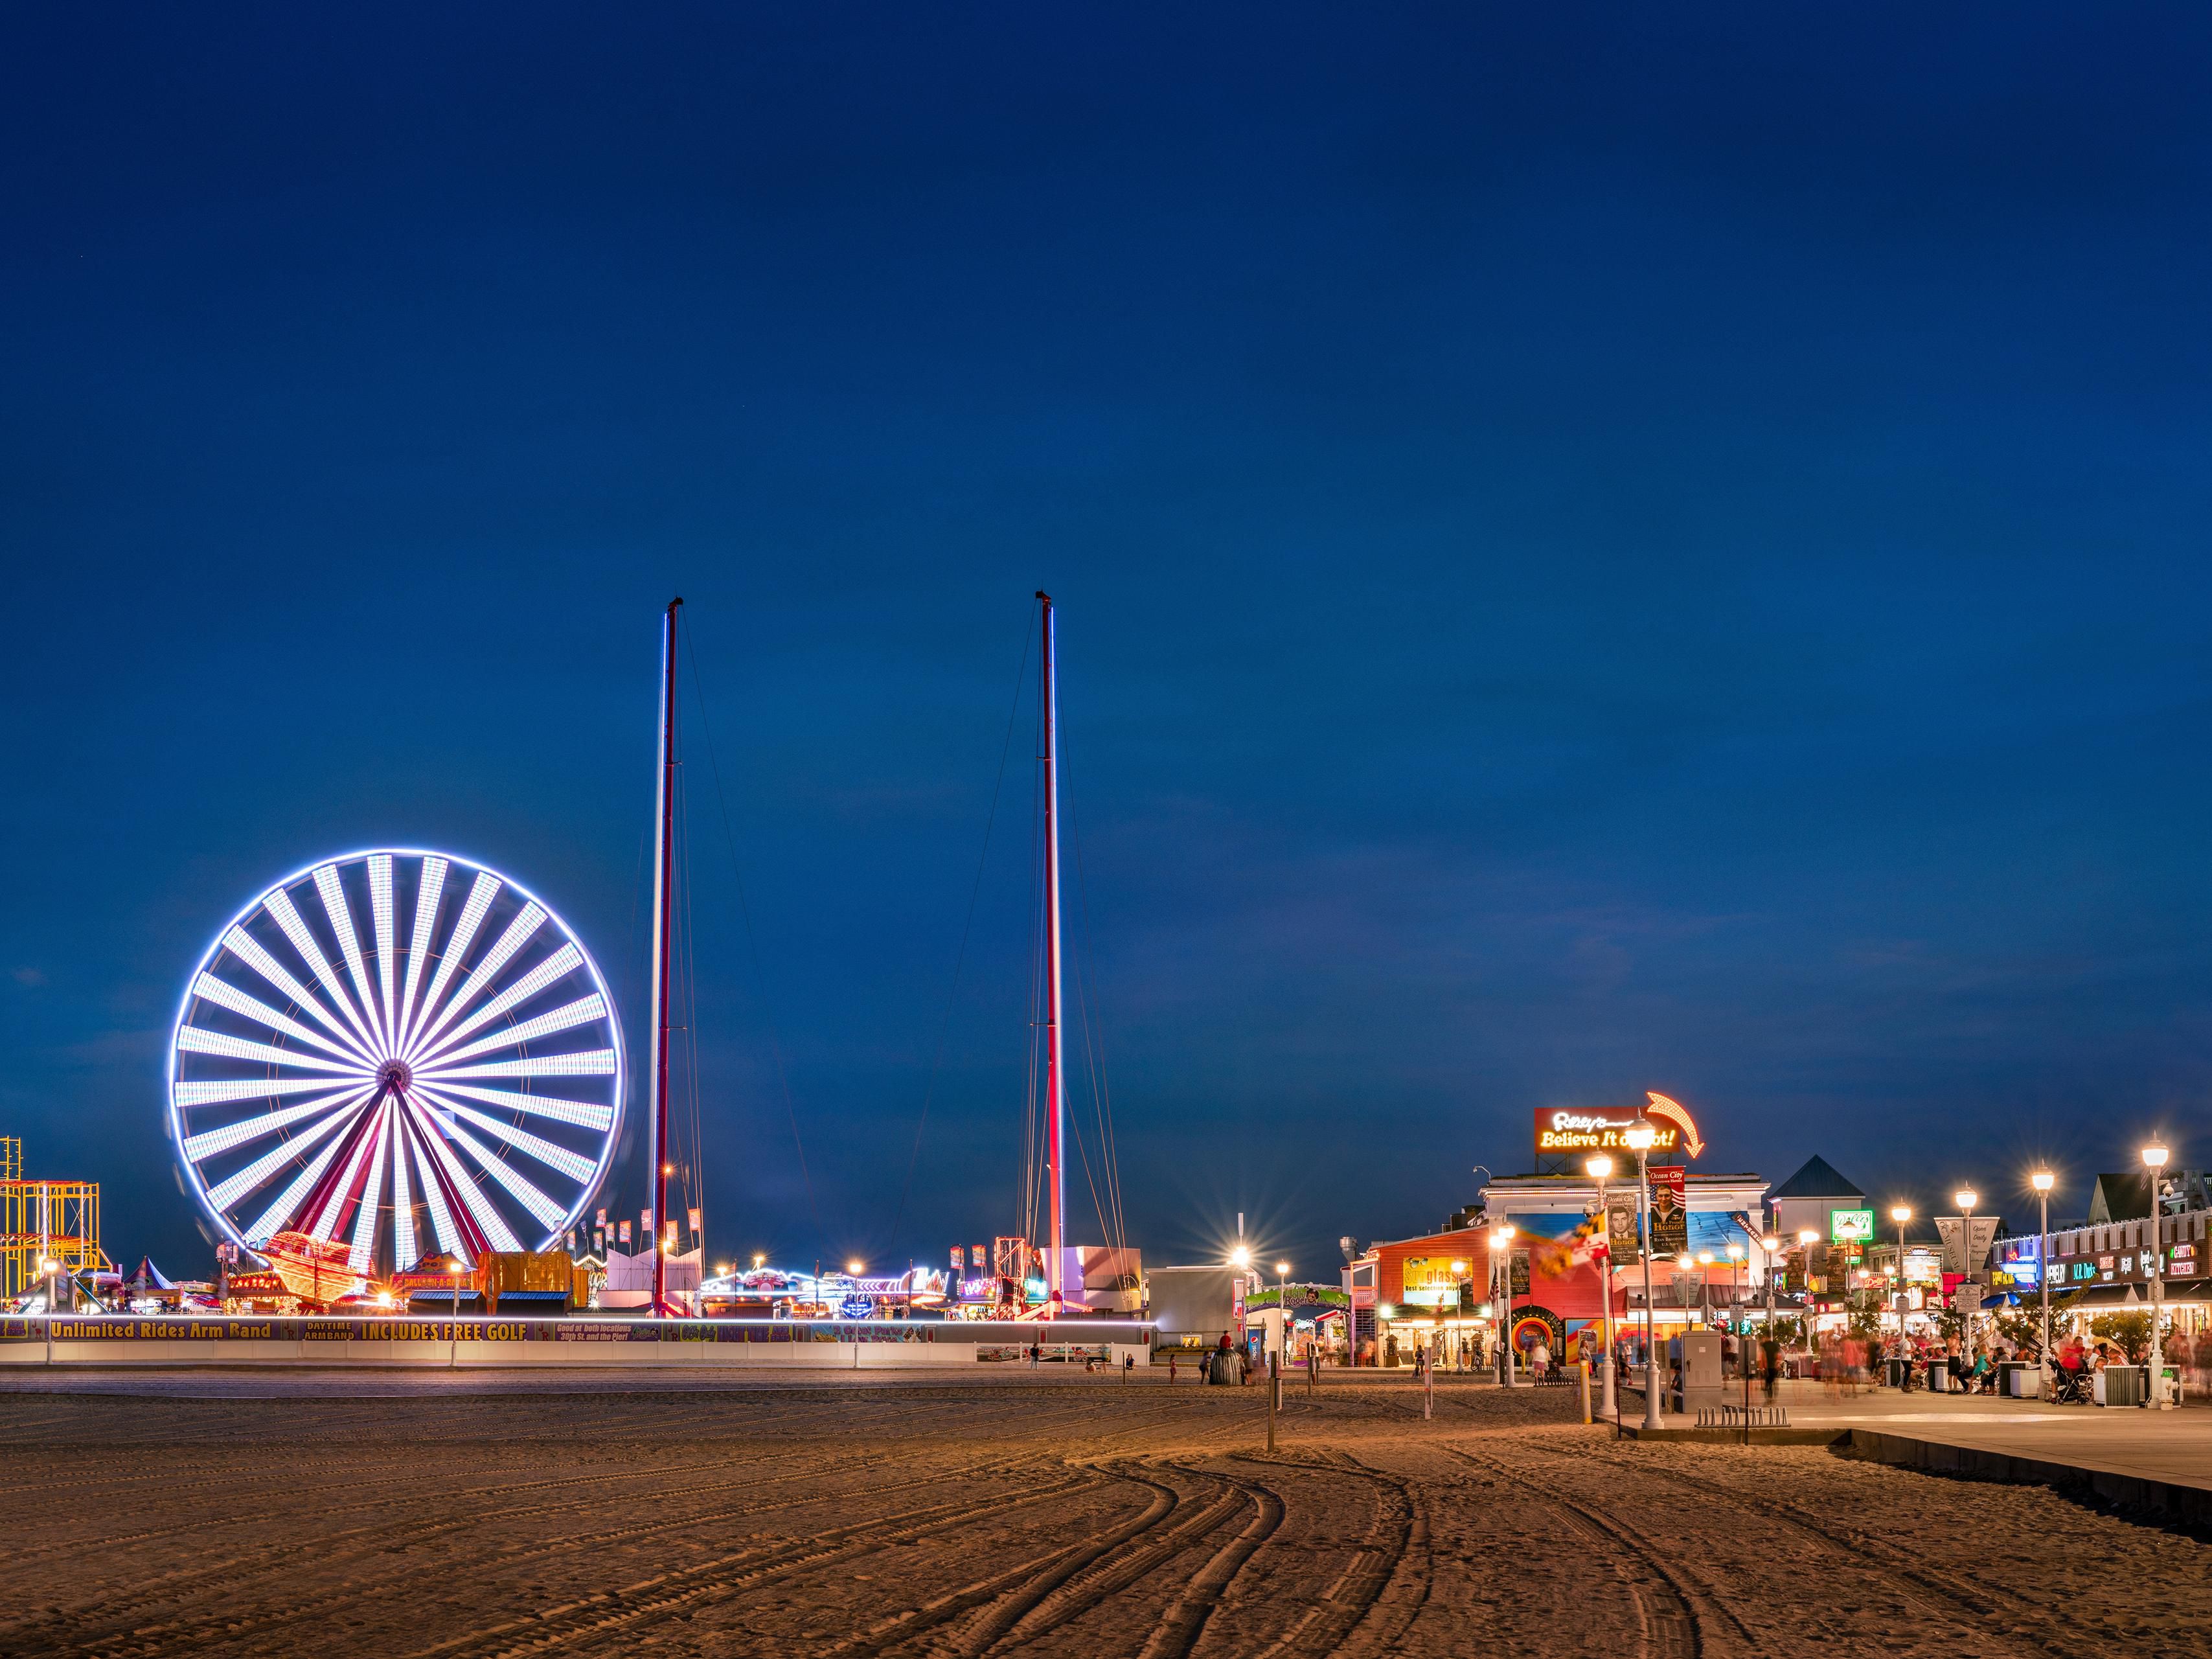 The Famous Ocean City Boardwalk is only a short drive away. Or take the Ocean City Beach Bus, operating 24 hours in season.  